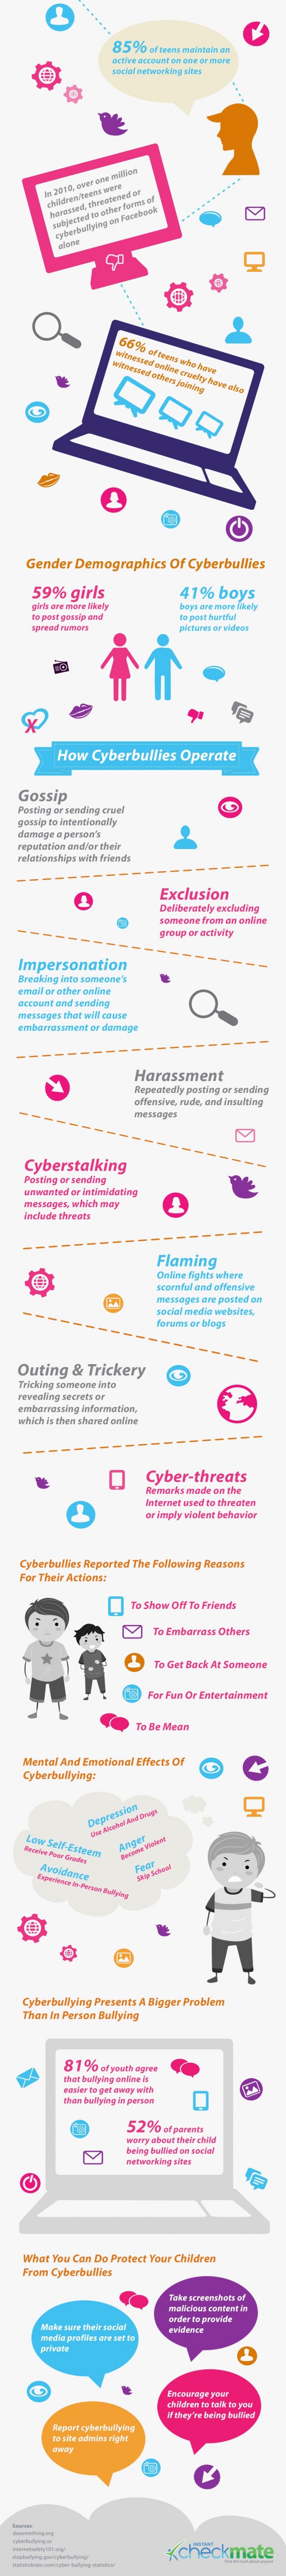 infographic_cyberbullying2